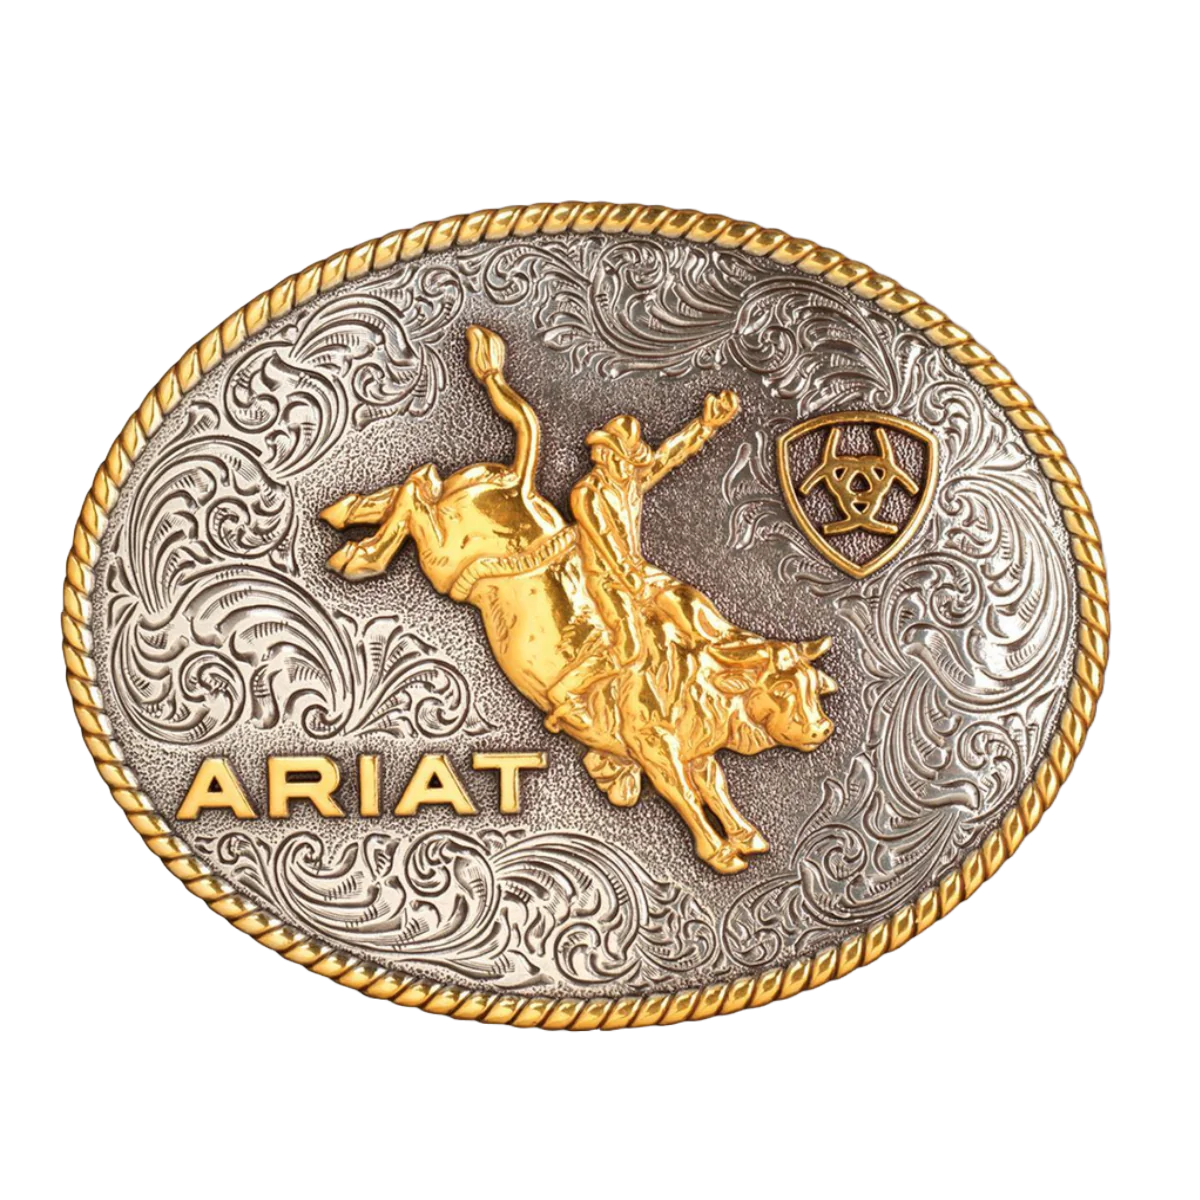 A37056 Ariat Oval Bull Rider Buckle